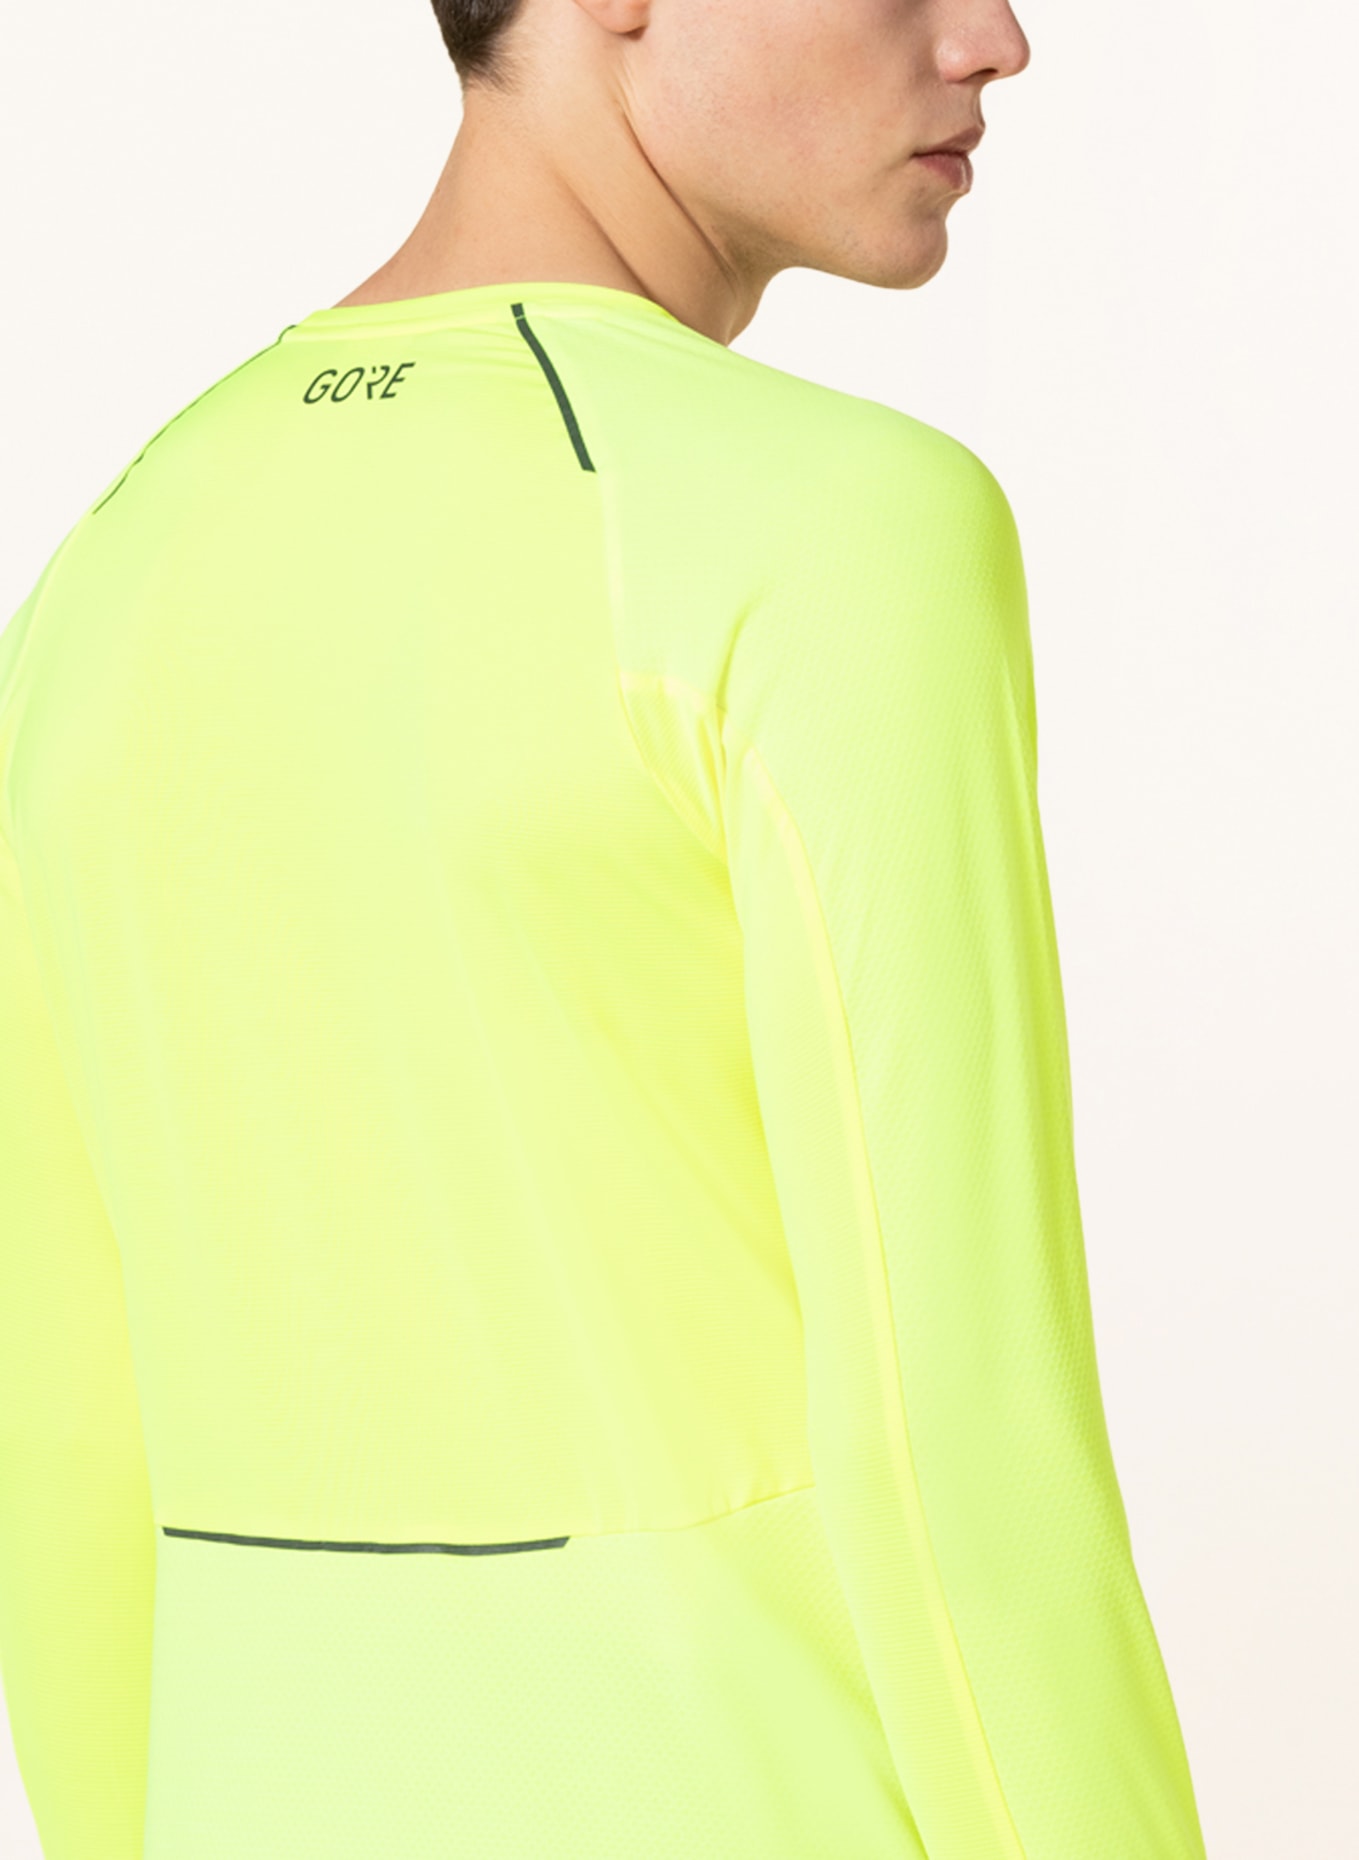 GORE RUNNING WEAR Running shirt ENERGETIC with mesh inserts, Color: NEON YELLOW (Image 4)